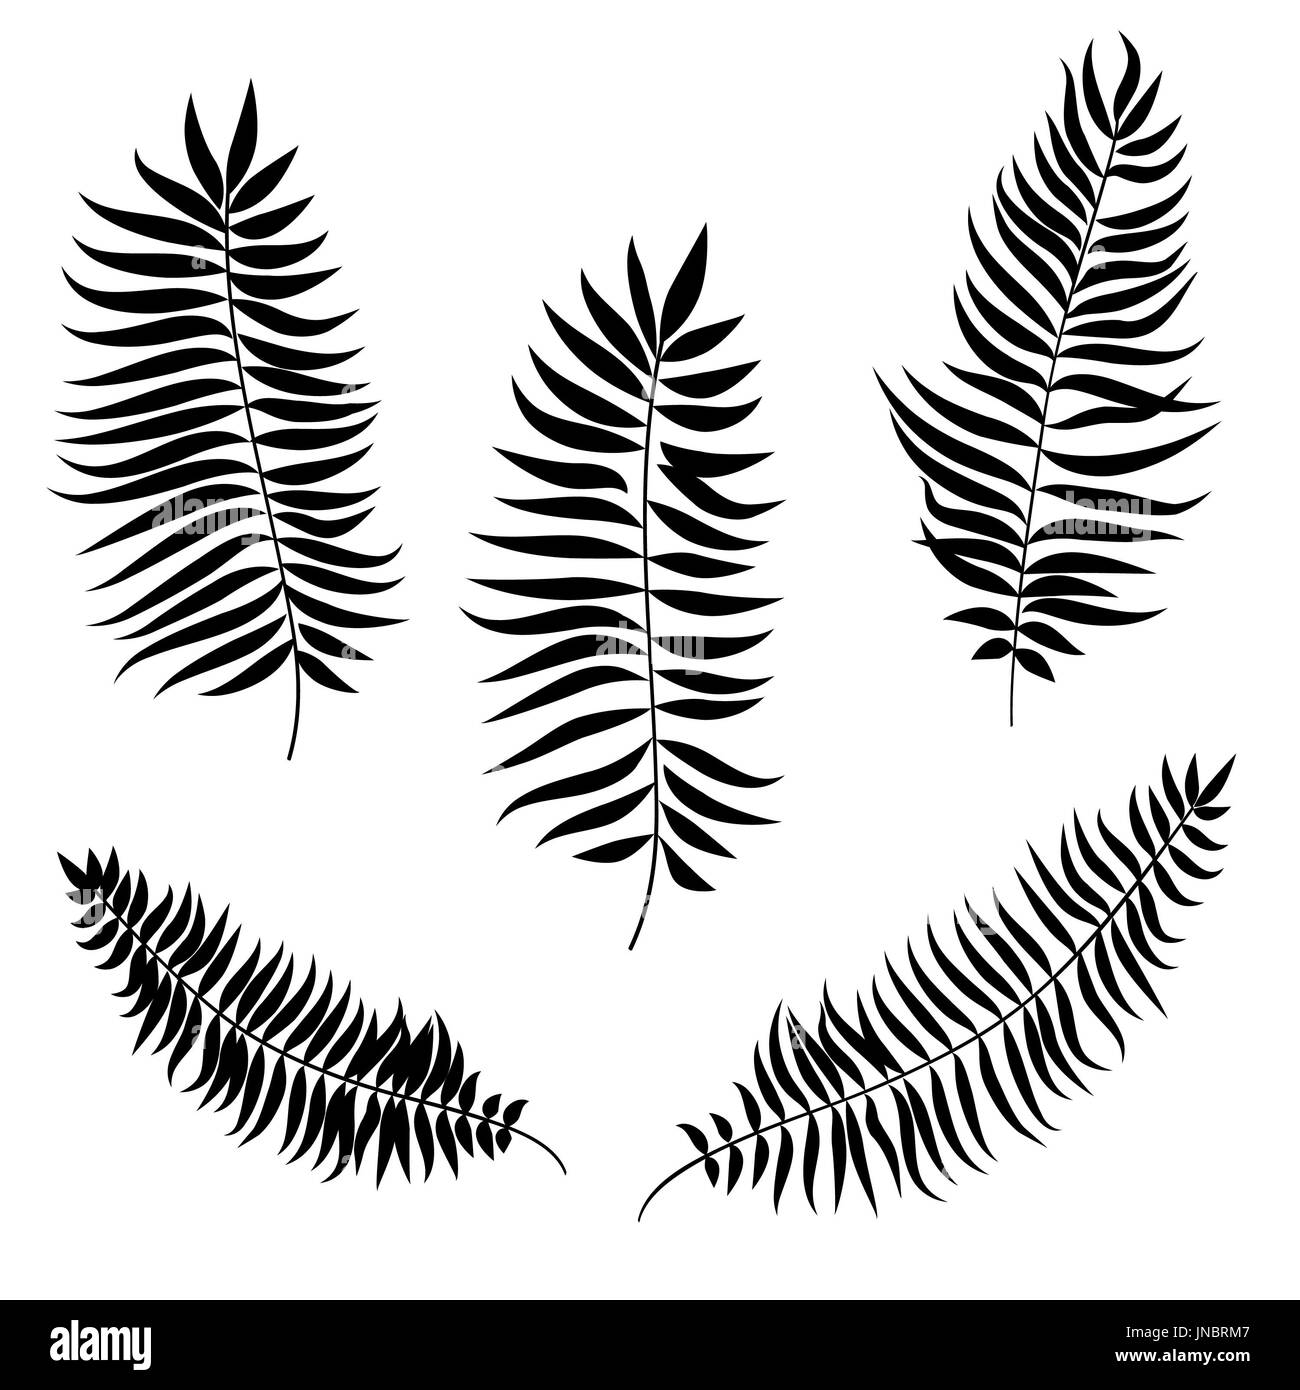 Leaves set. Palm leaf silhouette. Nature decor collection Stock Photo